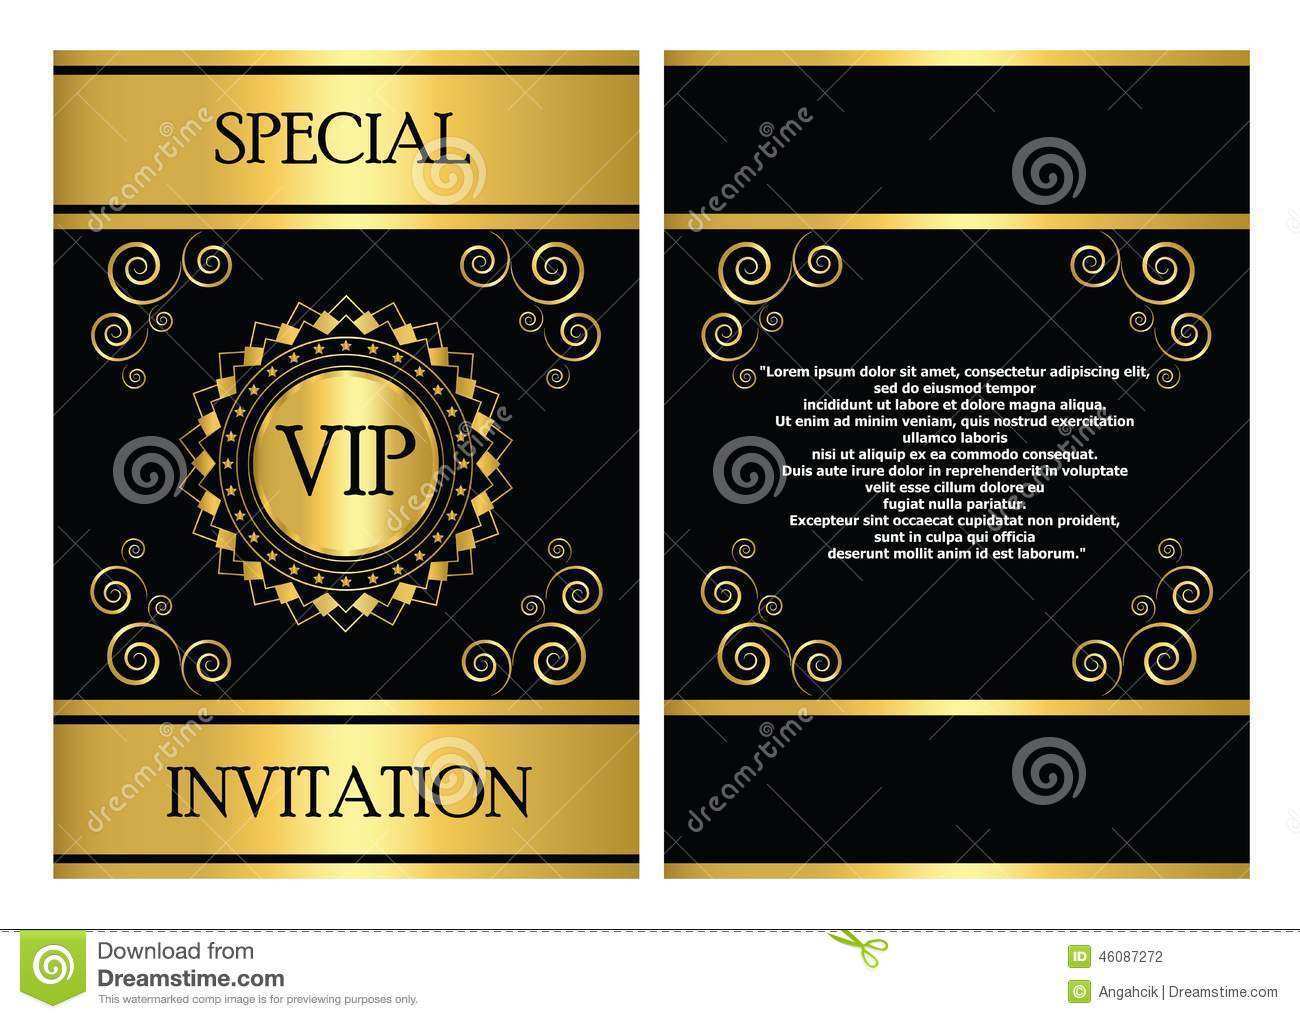 61 Customize Business Invitation Card Template Free Download for Ms Word with Business Invitation Card Template Free Download